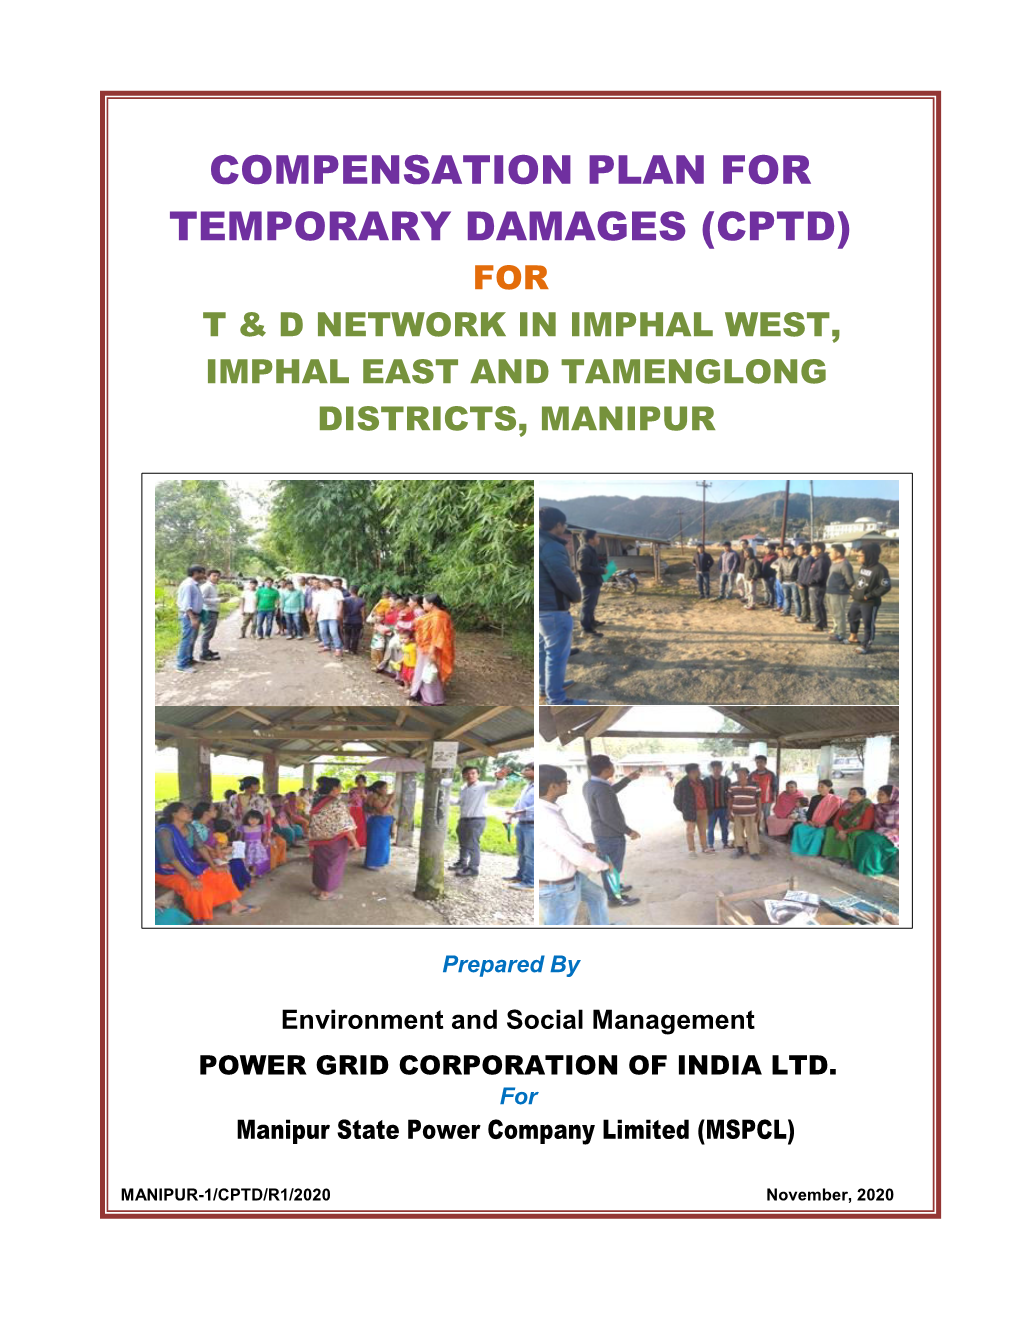 Compensation Plan for Temporary Damages (Cptd) for T & D Network in Imphal West, Imphal East and Tamenglong Districts, Manipur